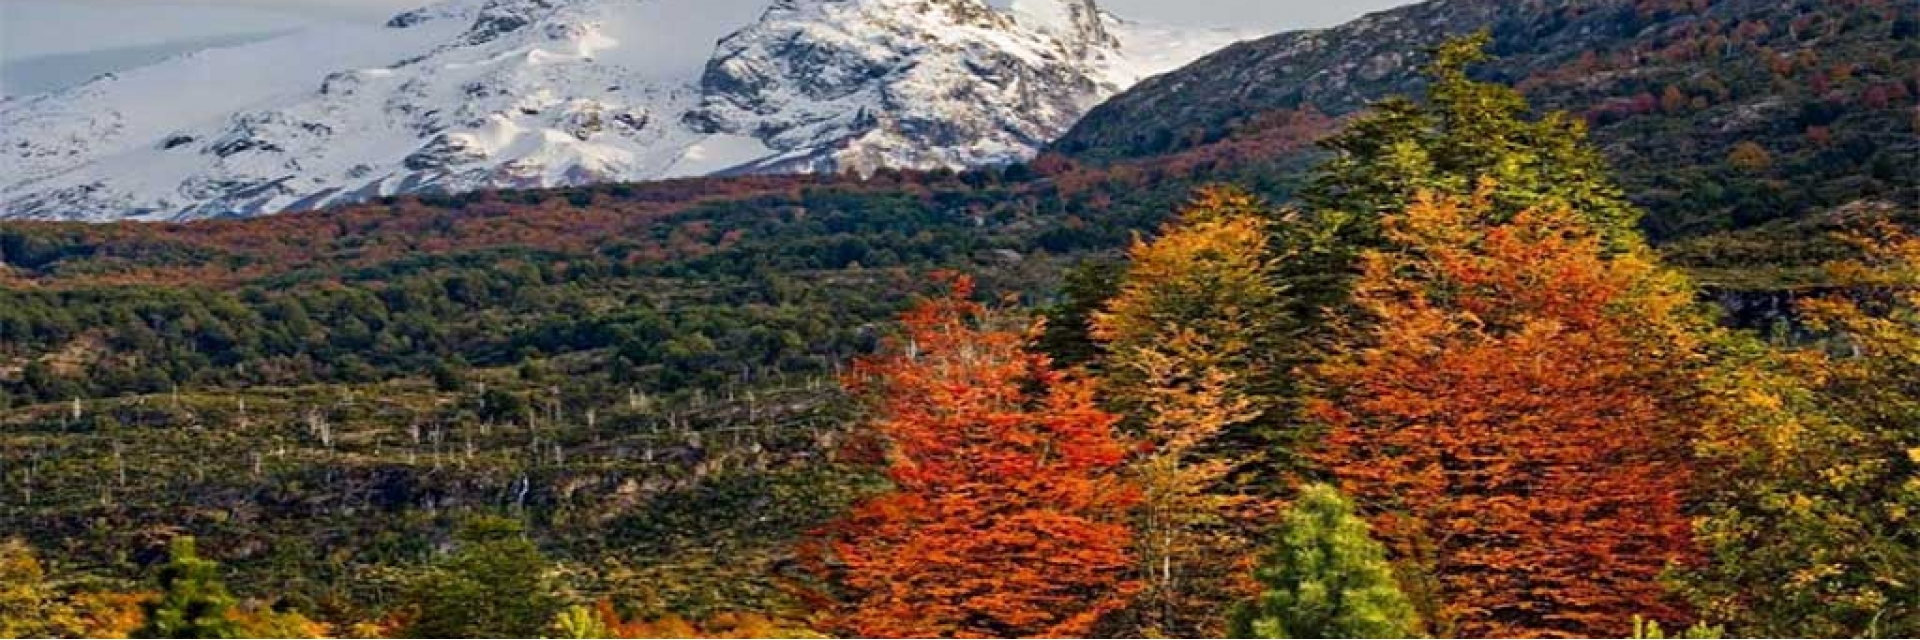 Must do in Patagonia